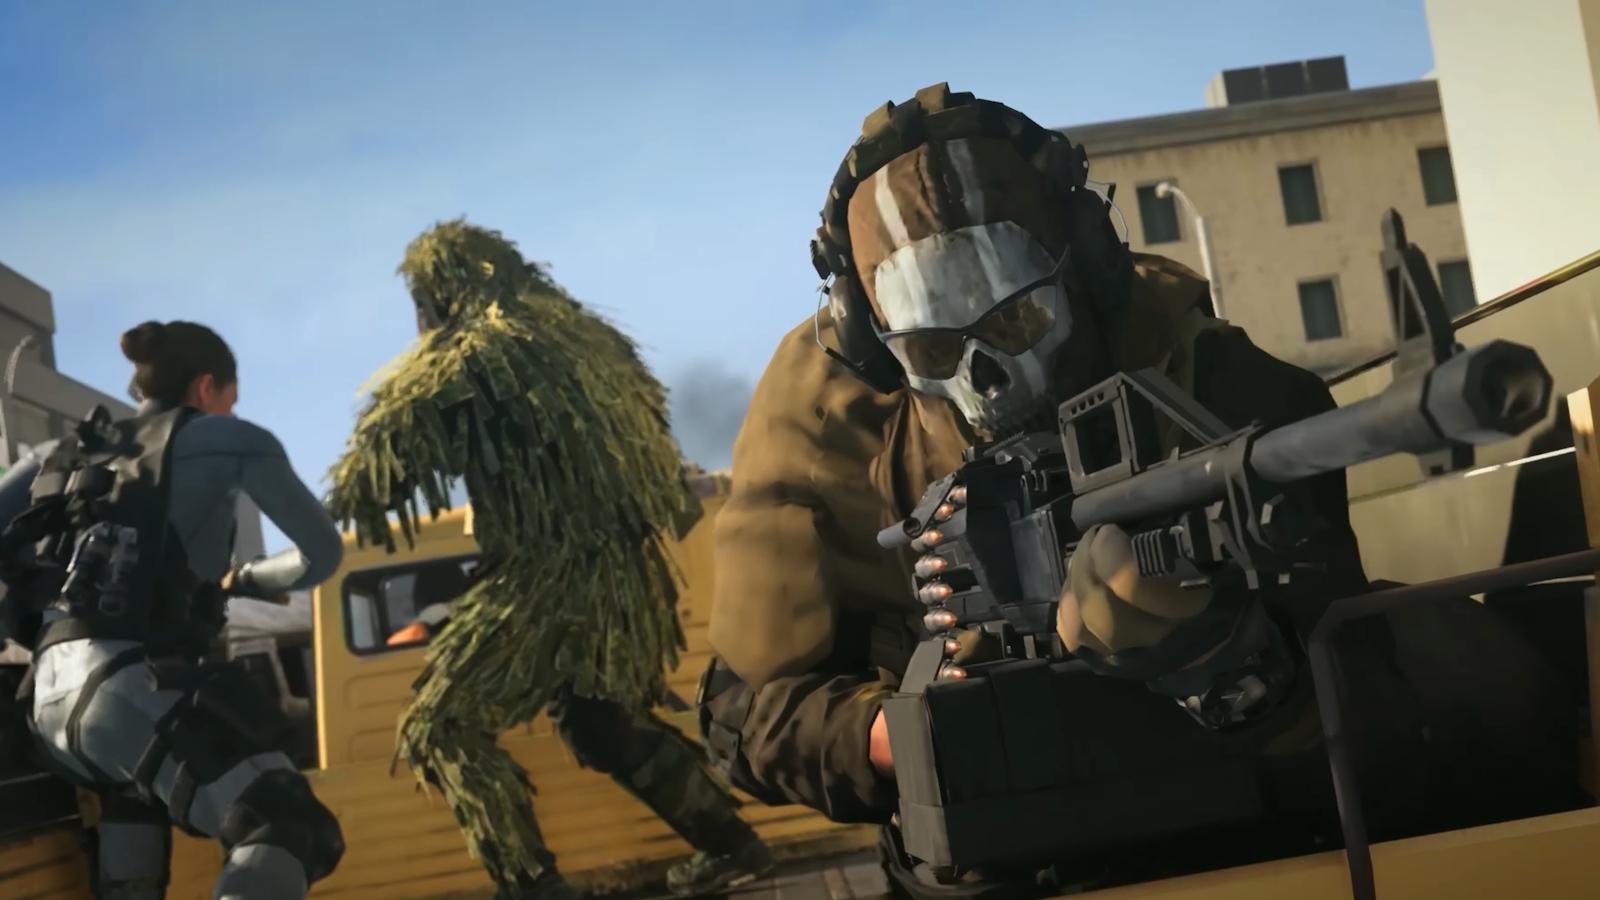 Warzone players with LMG shooting on truck with others dueling in background.